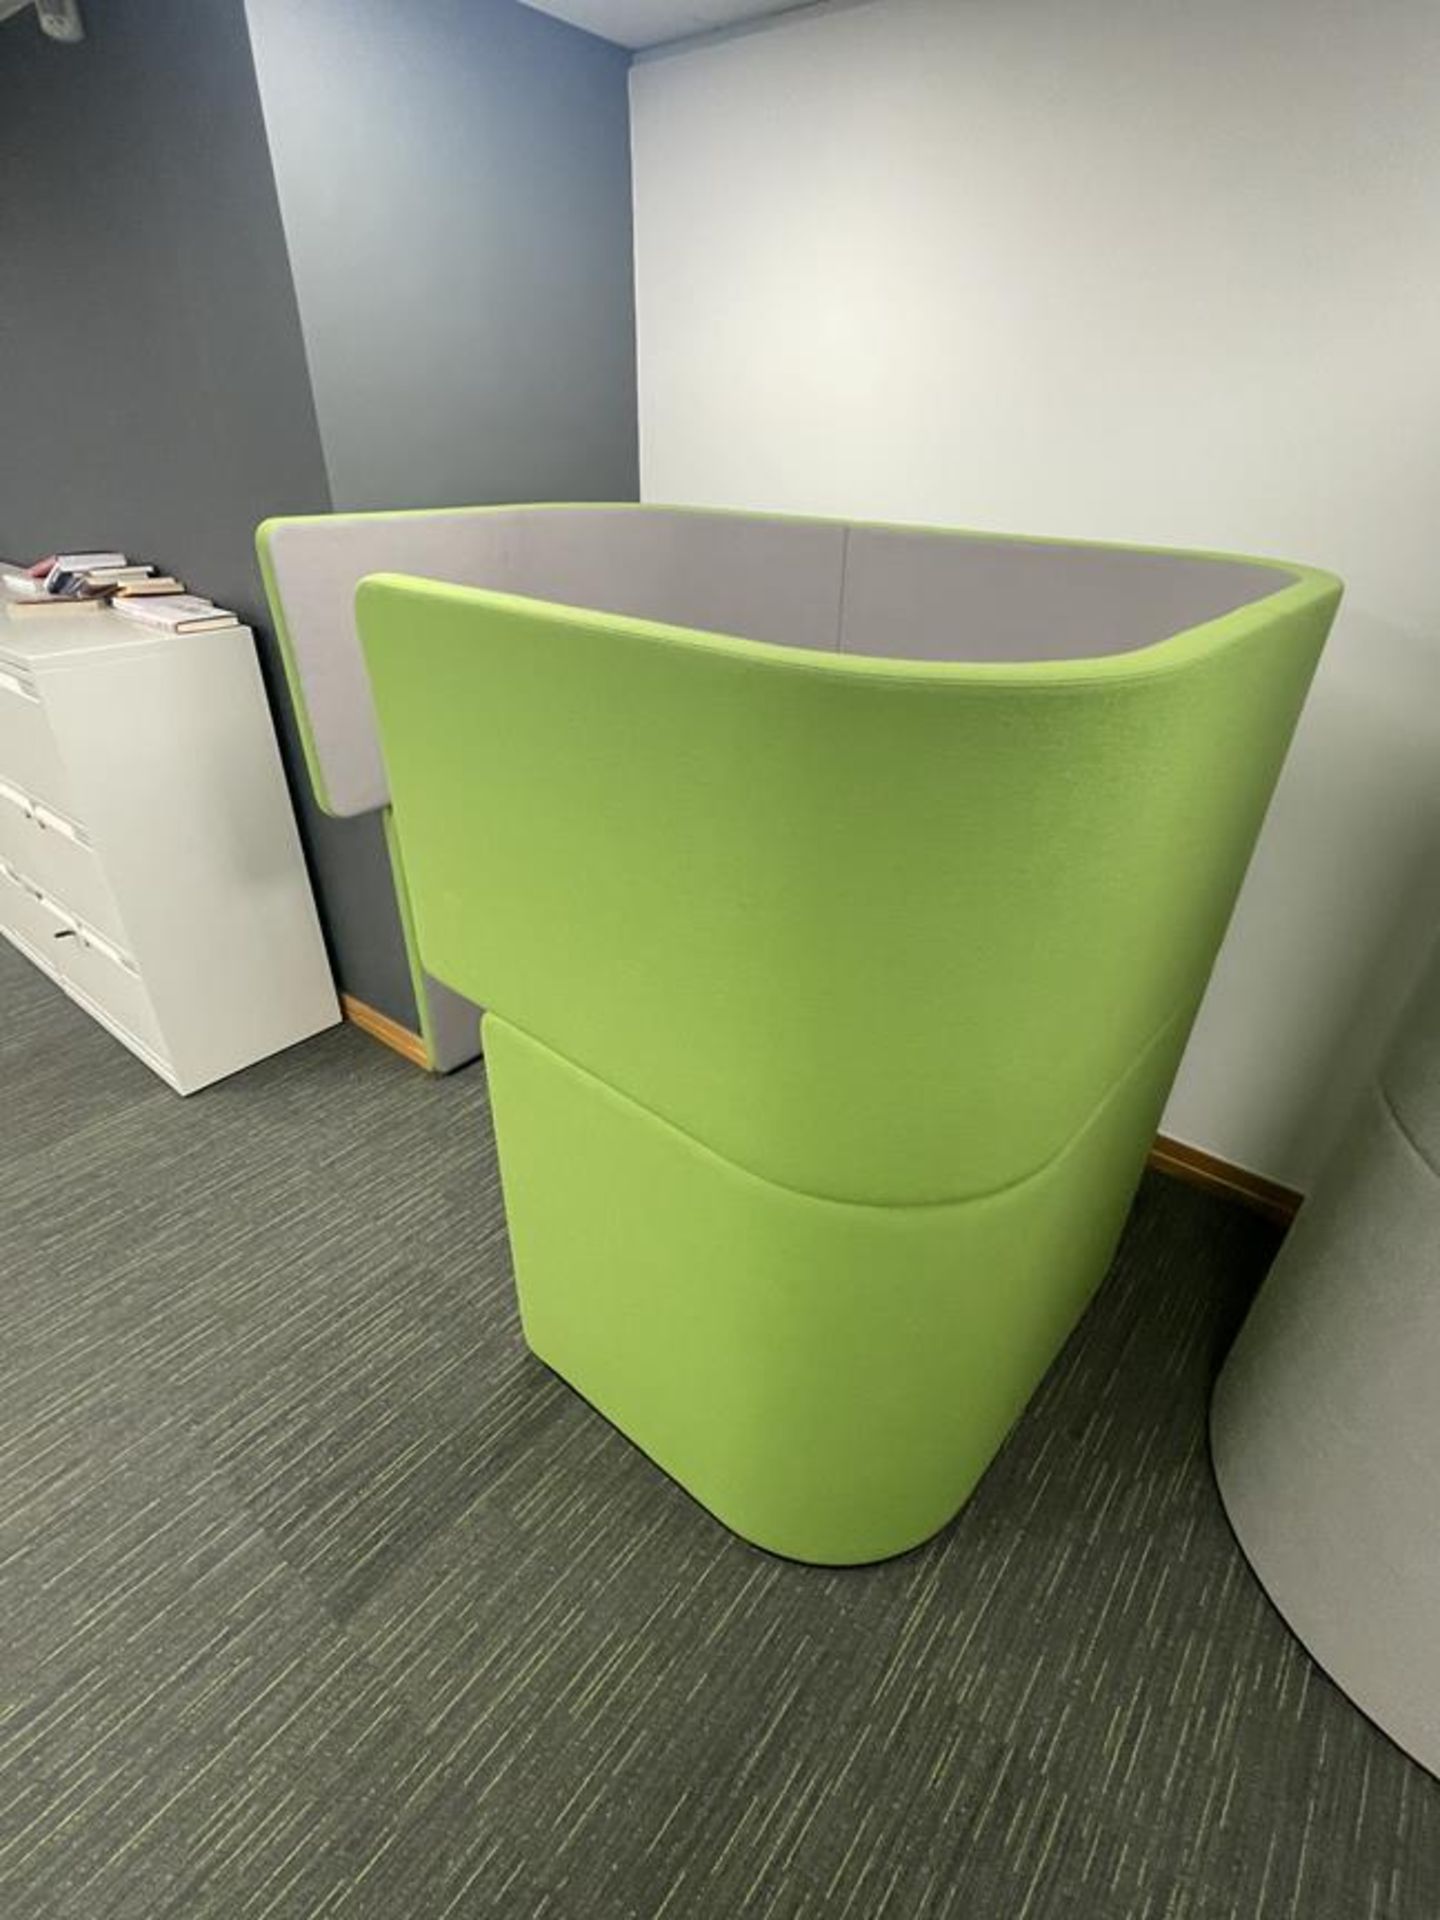 Bene Green/Grey Upholstered Privacy Desk Pod with Swivel Chair, Lamp and Desk Power (GB REF#134) - Image 2 of 3